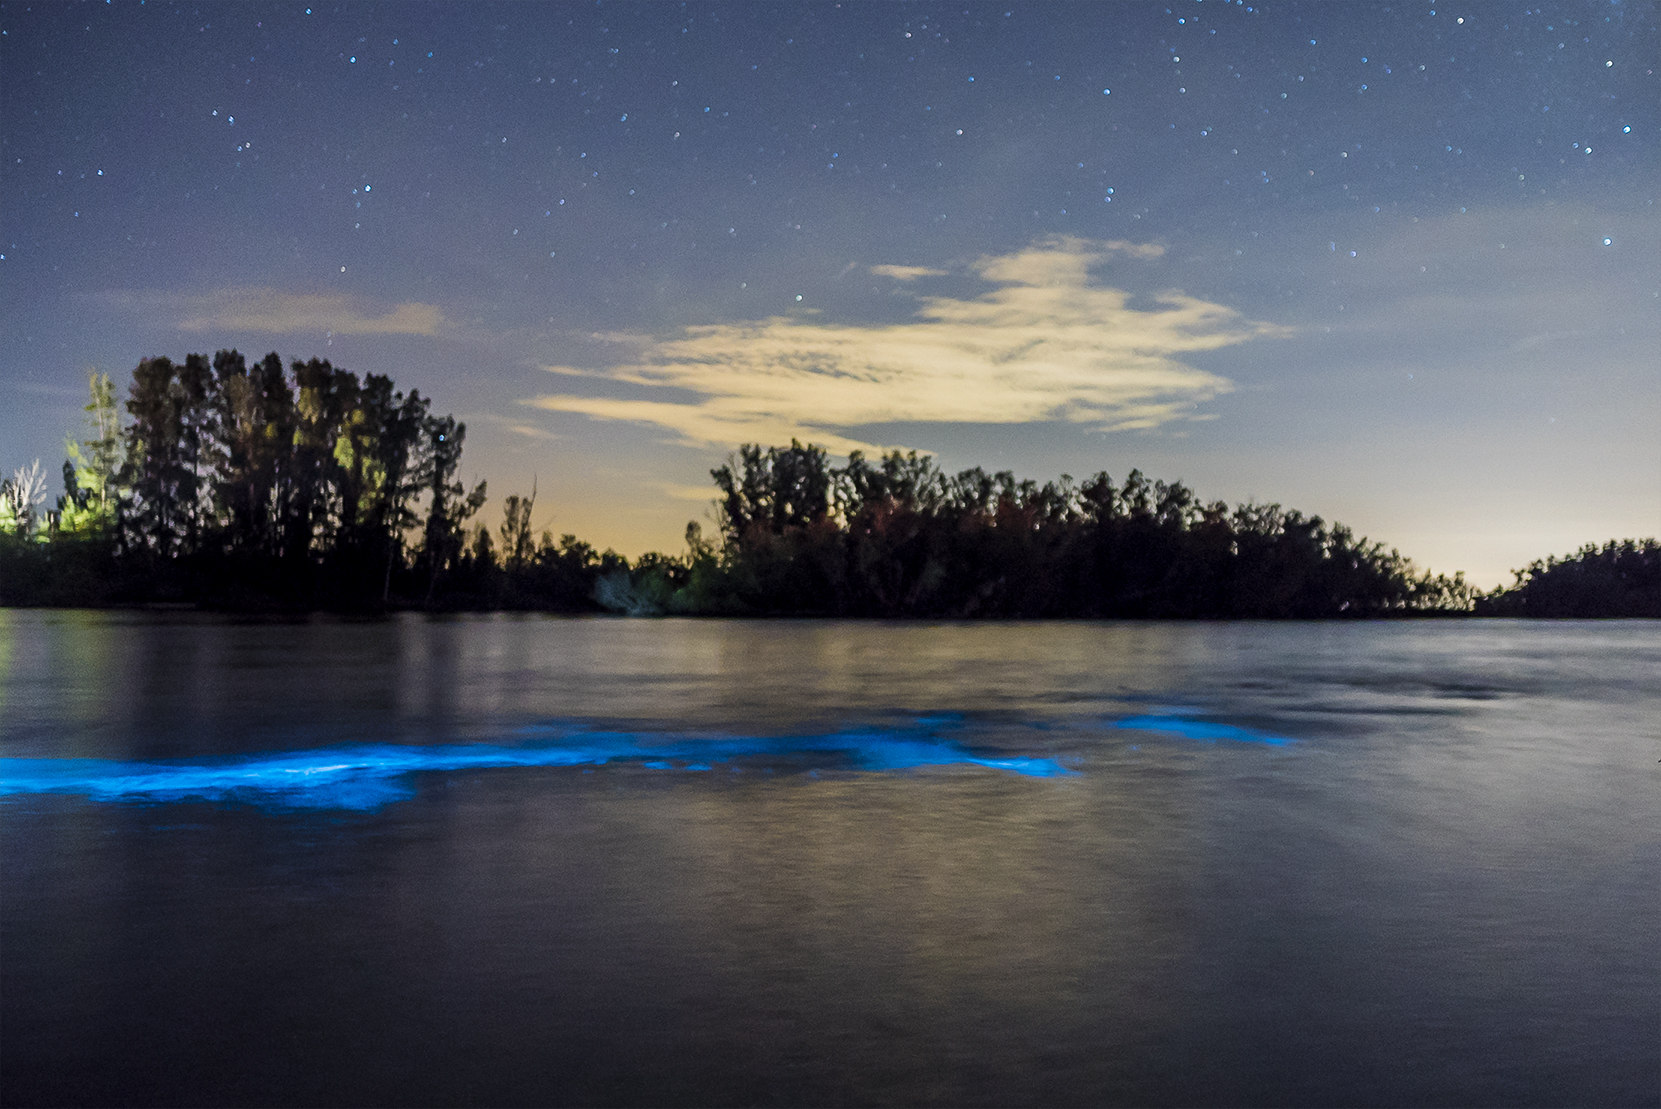 An evening photo of the middle of a lake showcasing trees in the background with a lit-up blue stream through it to showcase the bioluminescent glow of the water at night.